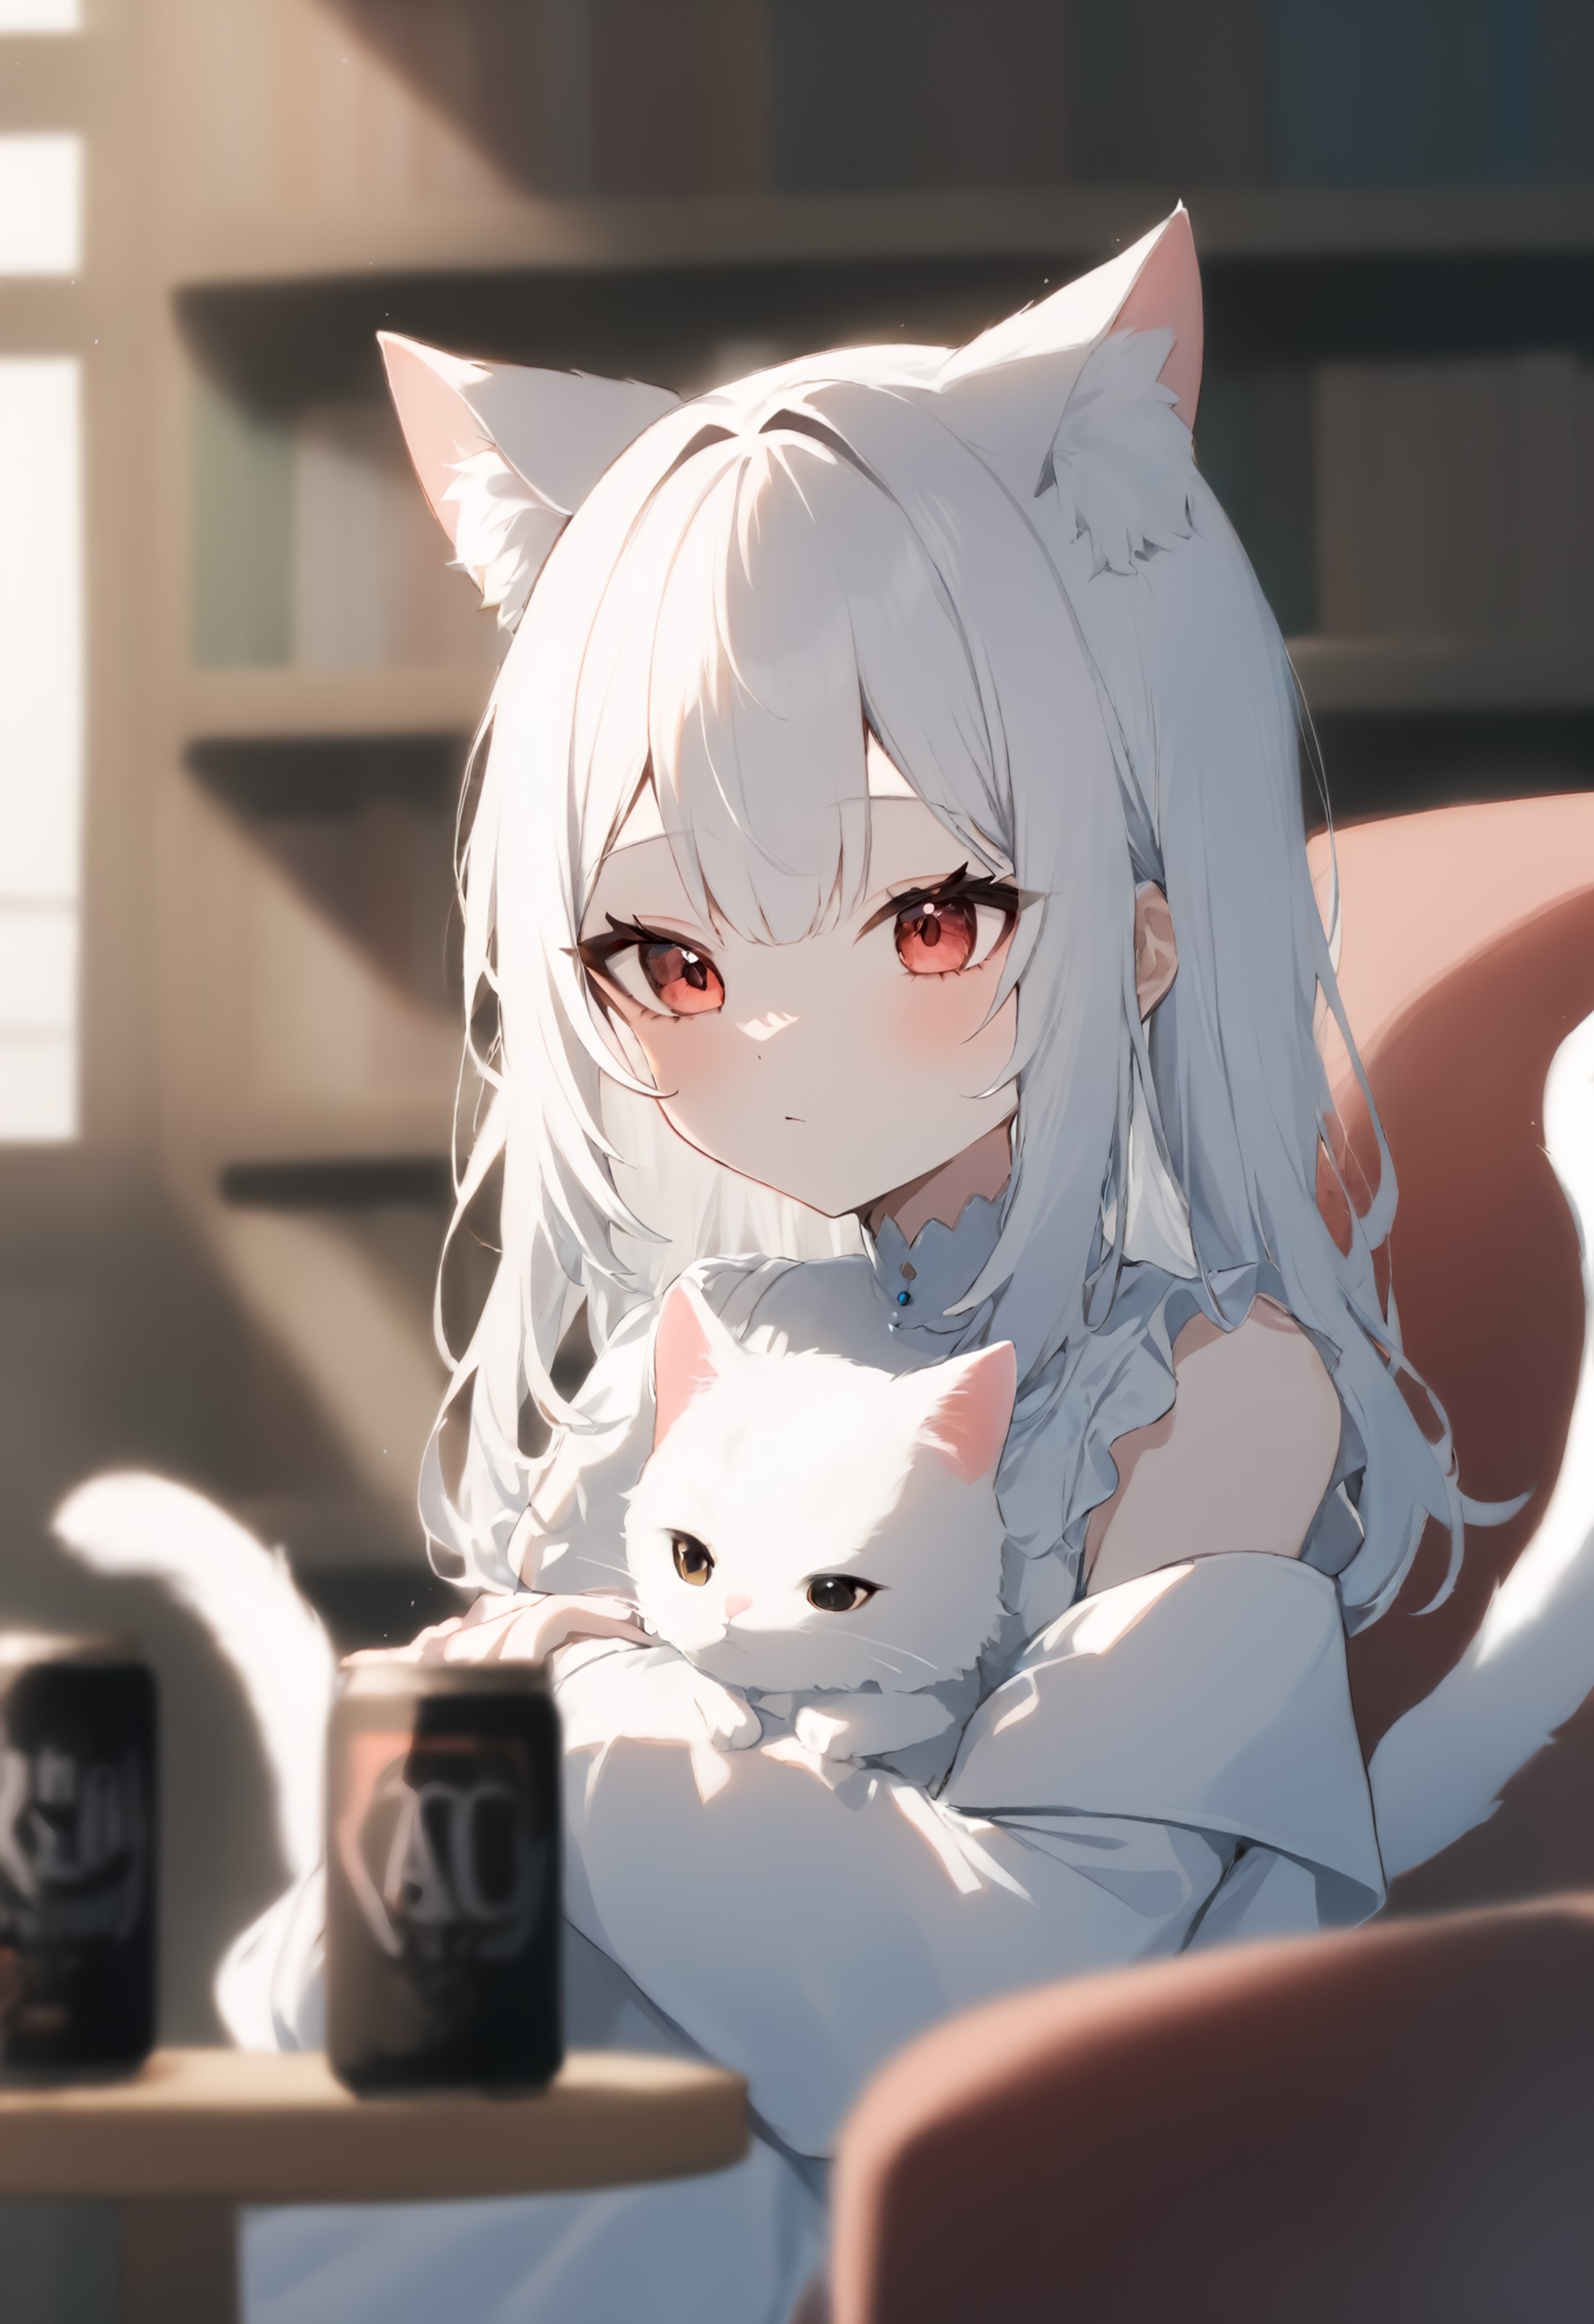 1girl, solo,
a young girl with white hair and wearing a white dress sits on a couch, embracing a white cat, She has cat ea...